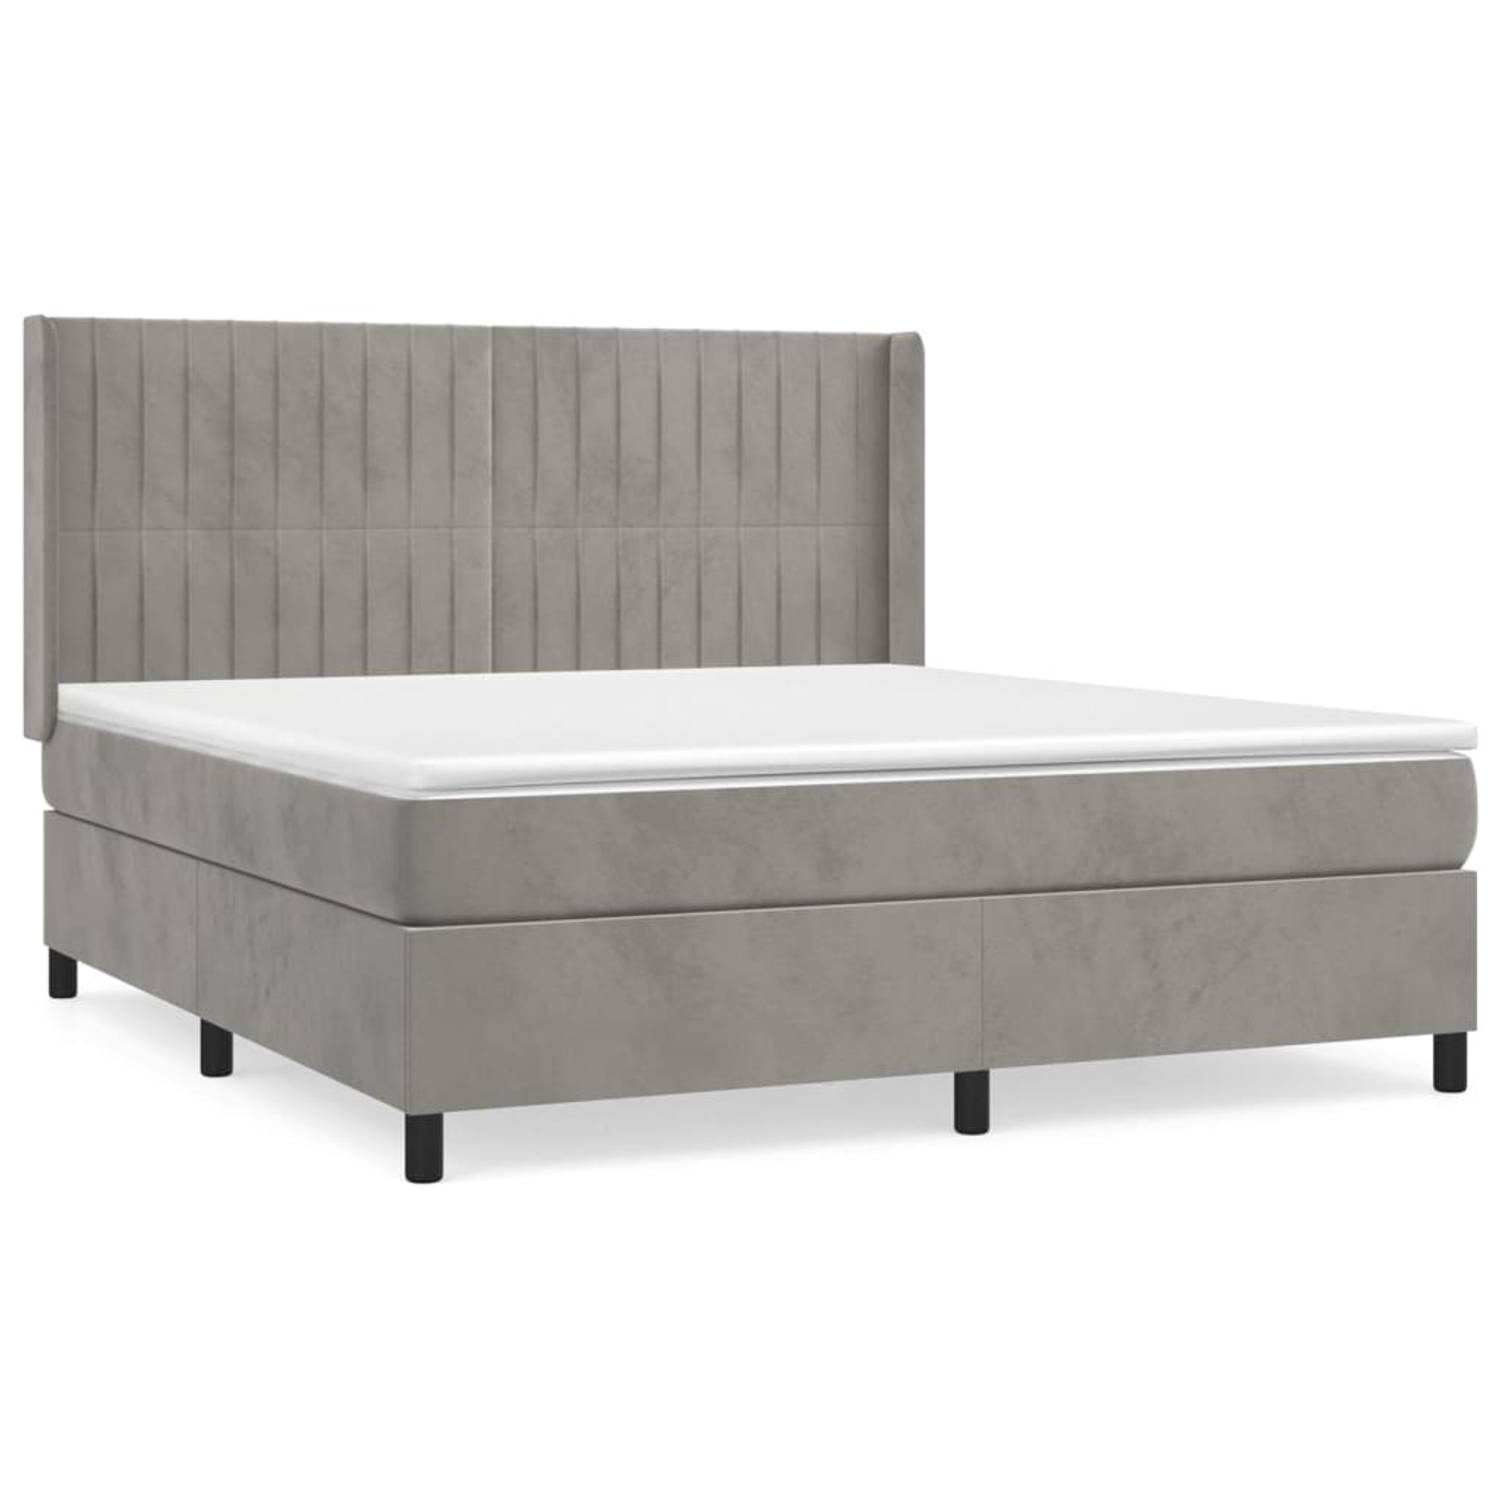 The Living Store Bed The Living Store - Boxspringbed - Fluweel - 180x200x20 cm - Pocketvering